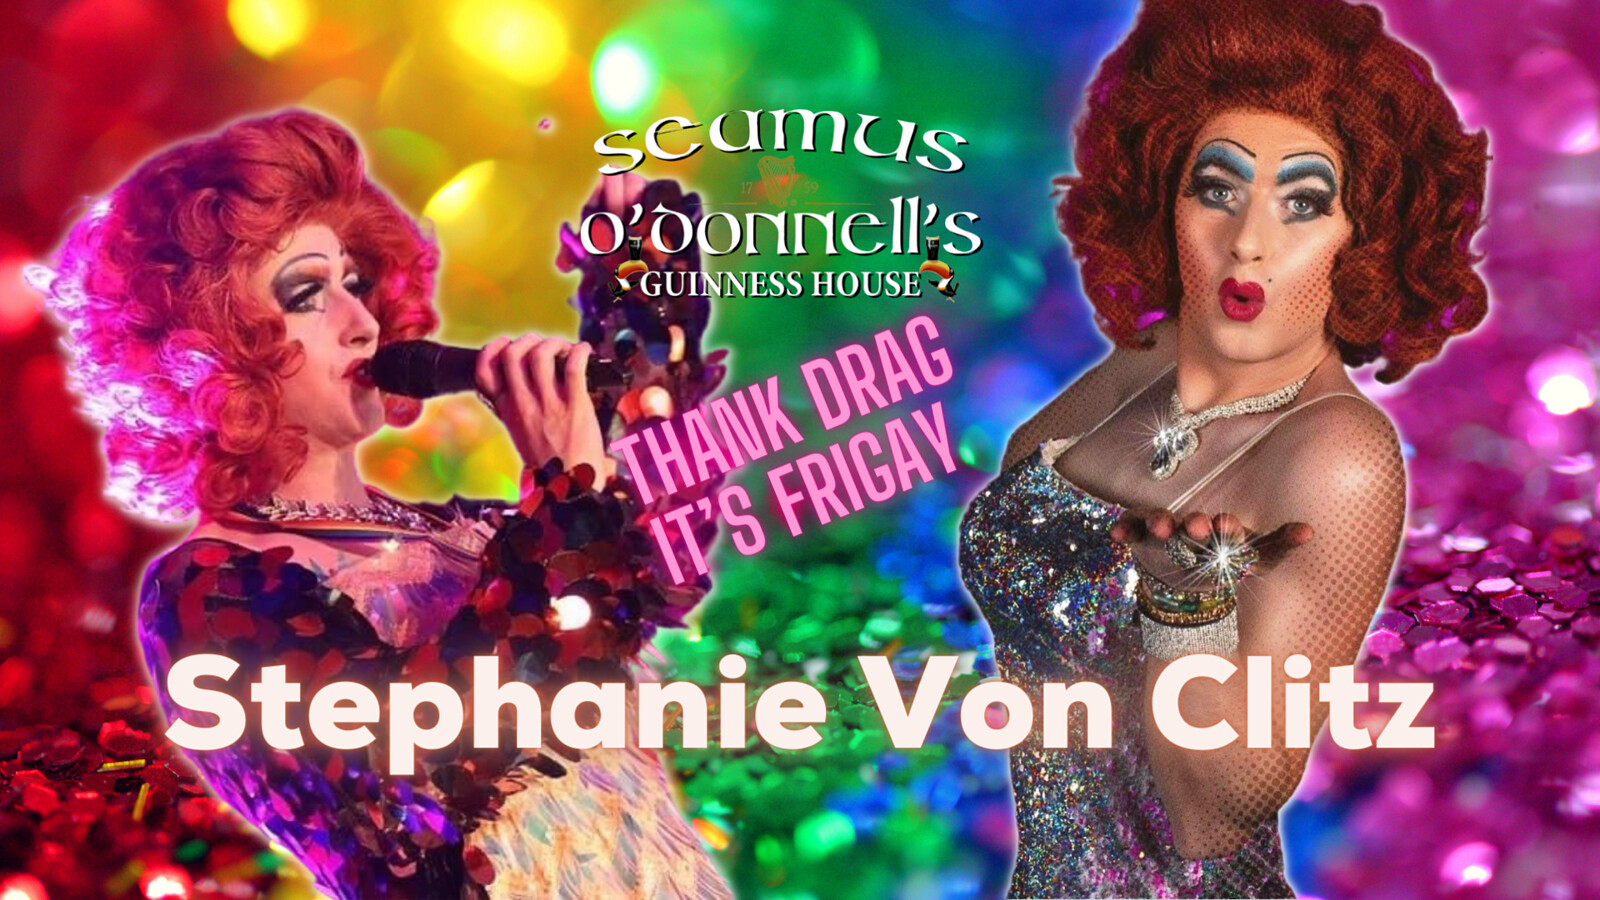 Thank Drag It's FriGay with Stephanie Von Clitz at Seamus O'Donnell's